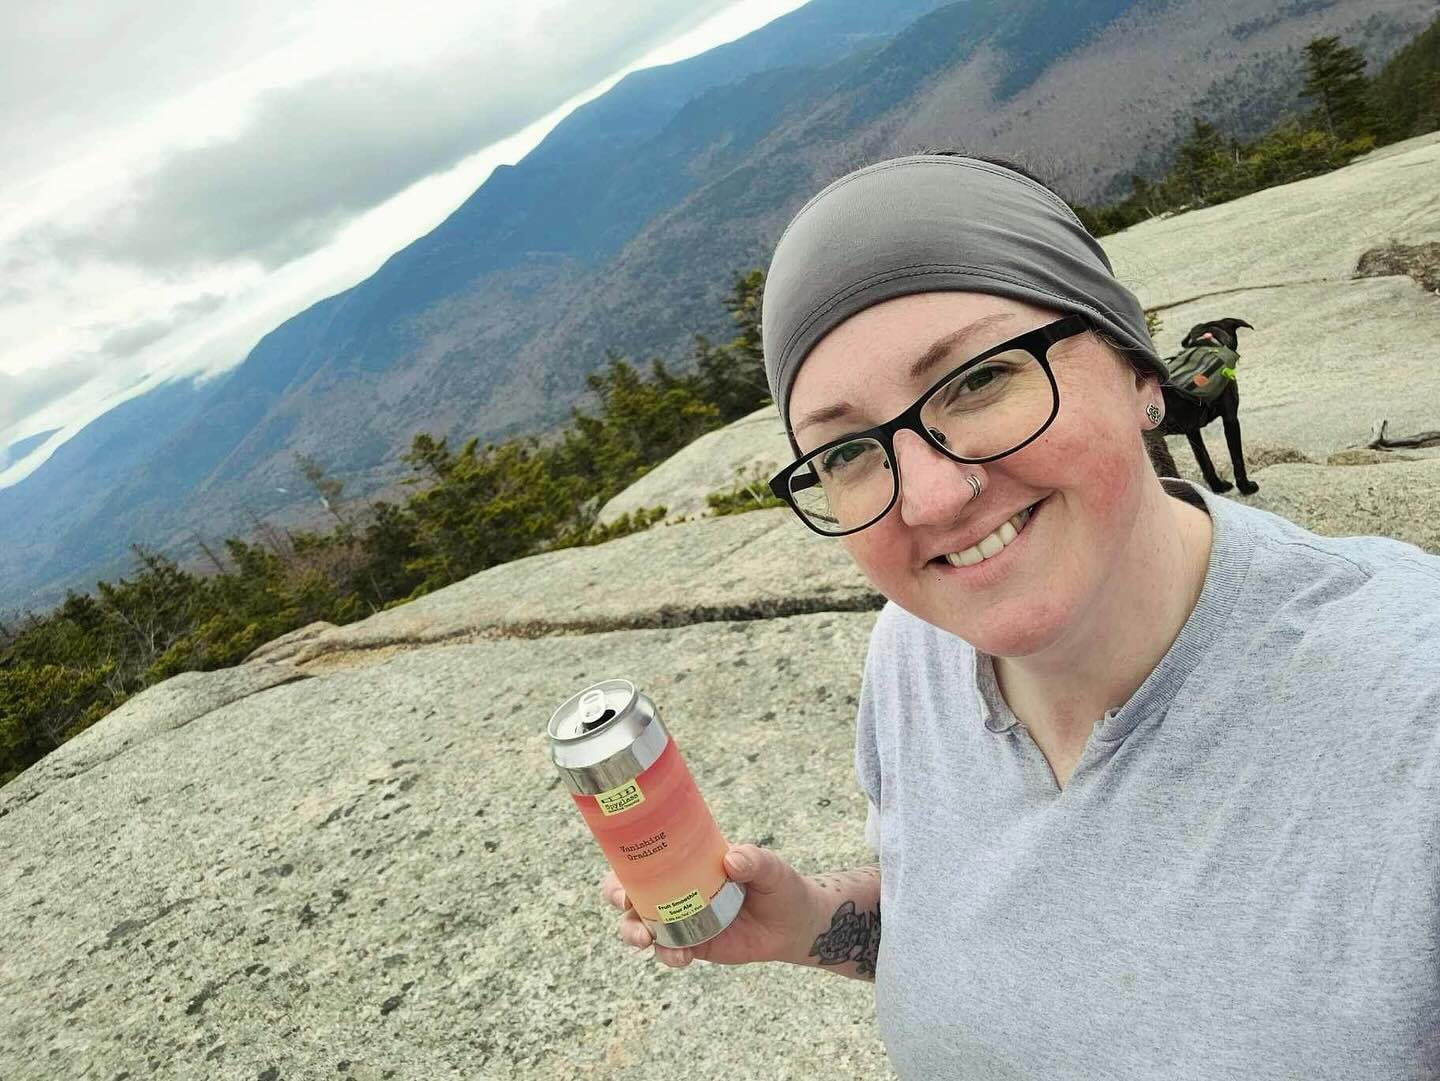 ⛰️Adventures with Spyglass⛰️

Featuring - Vanishing Gradient on the Welch-Dickey loop trail in the White Mountains.

@grinning_sinner says &ldquo;this one is DELICIOUS!!! And I absolutely love the hologram flavors as well.&rdquo;

Thanks for taking u